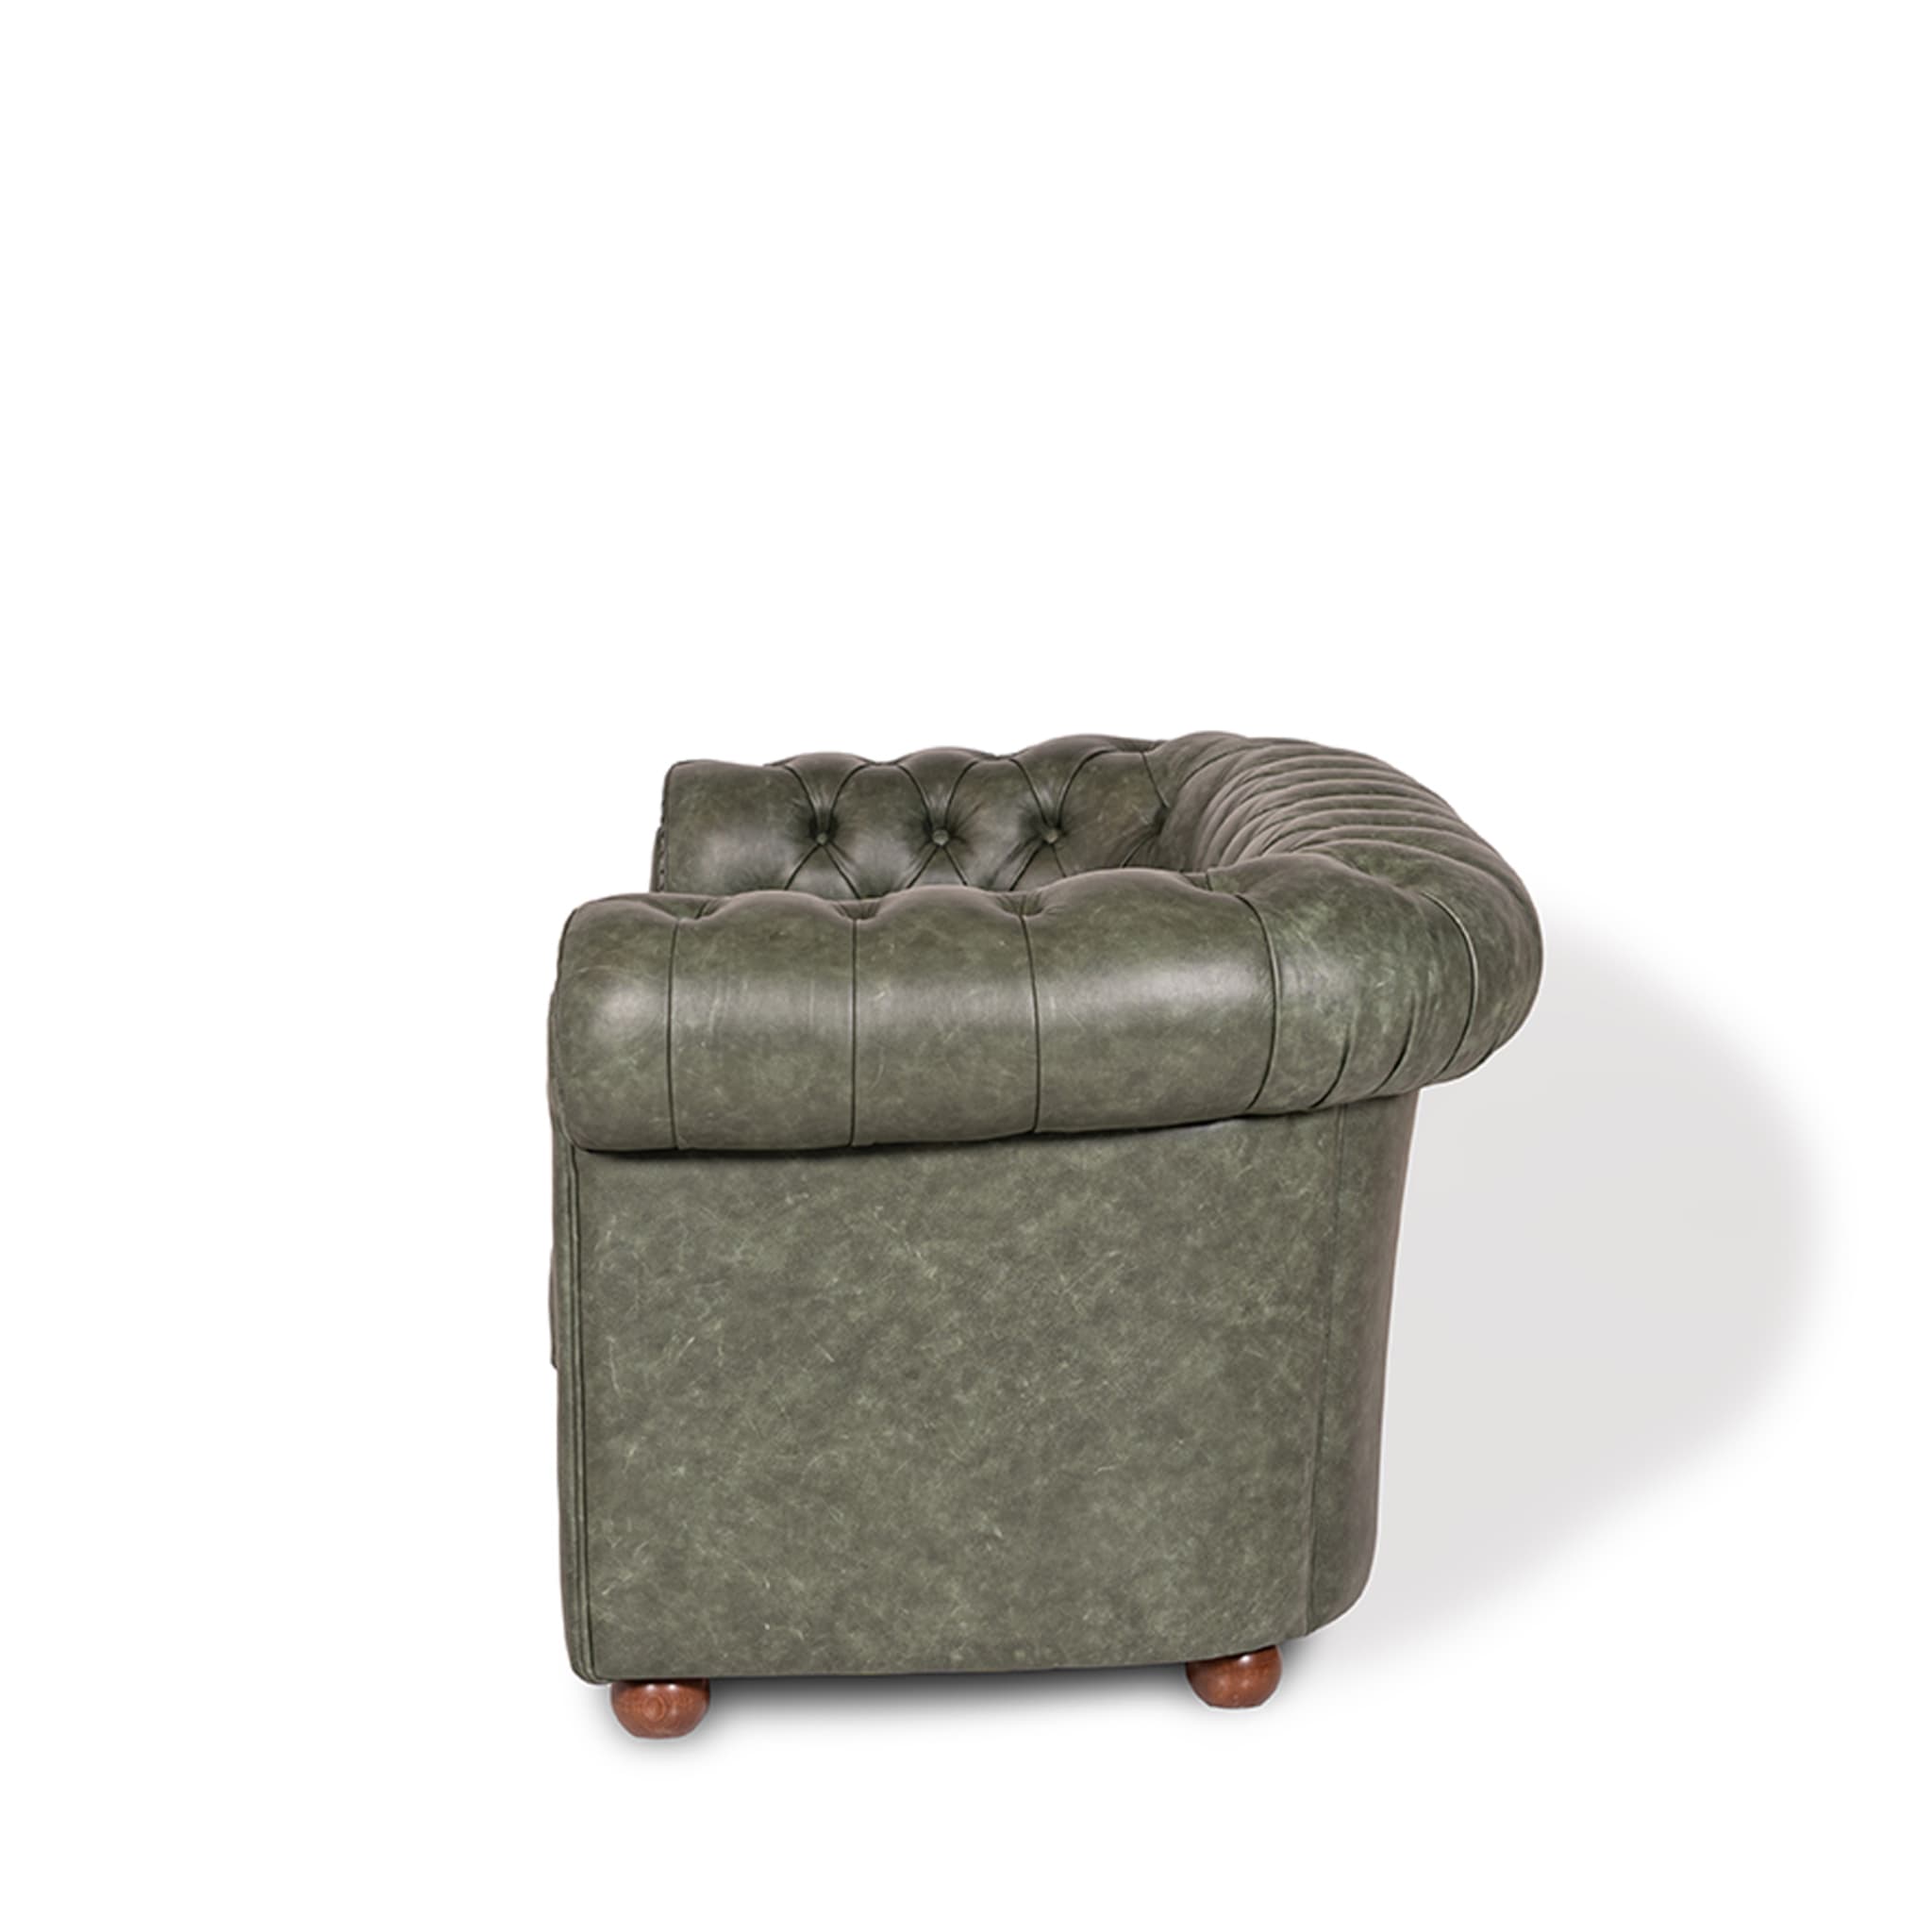 Chesterfield Green Leather Sofa - Alternative view 4